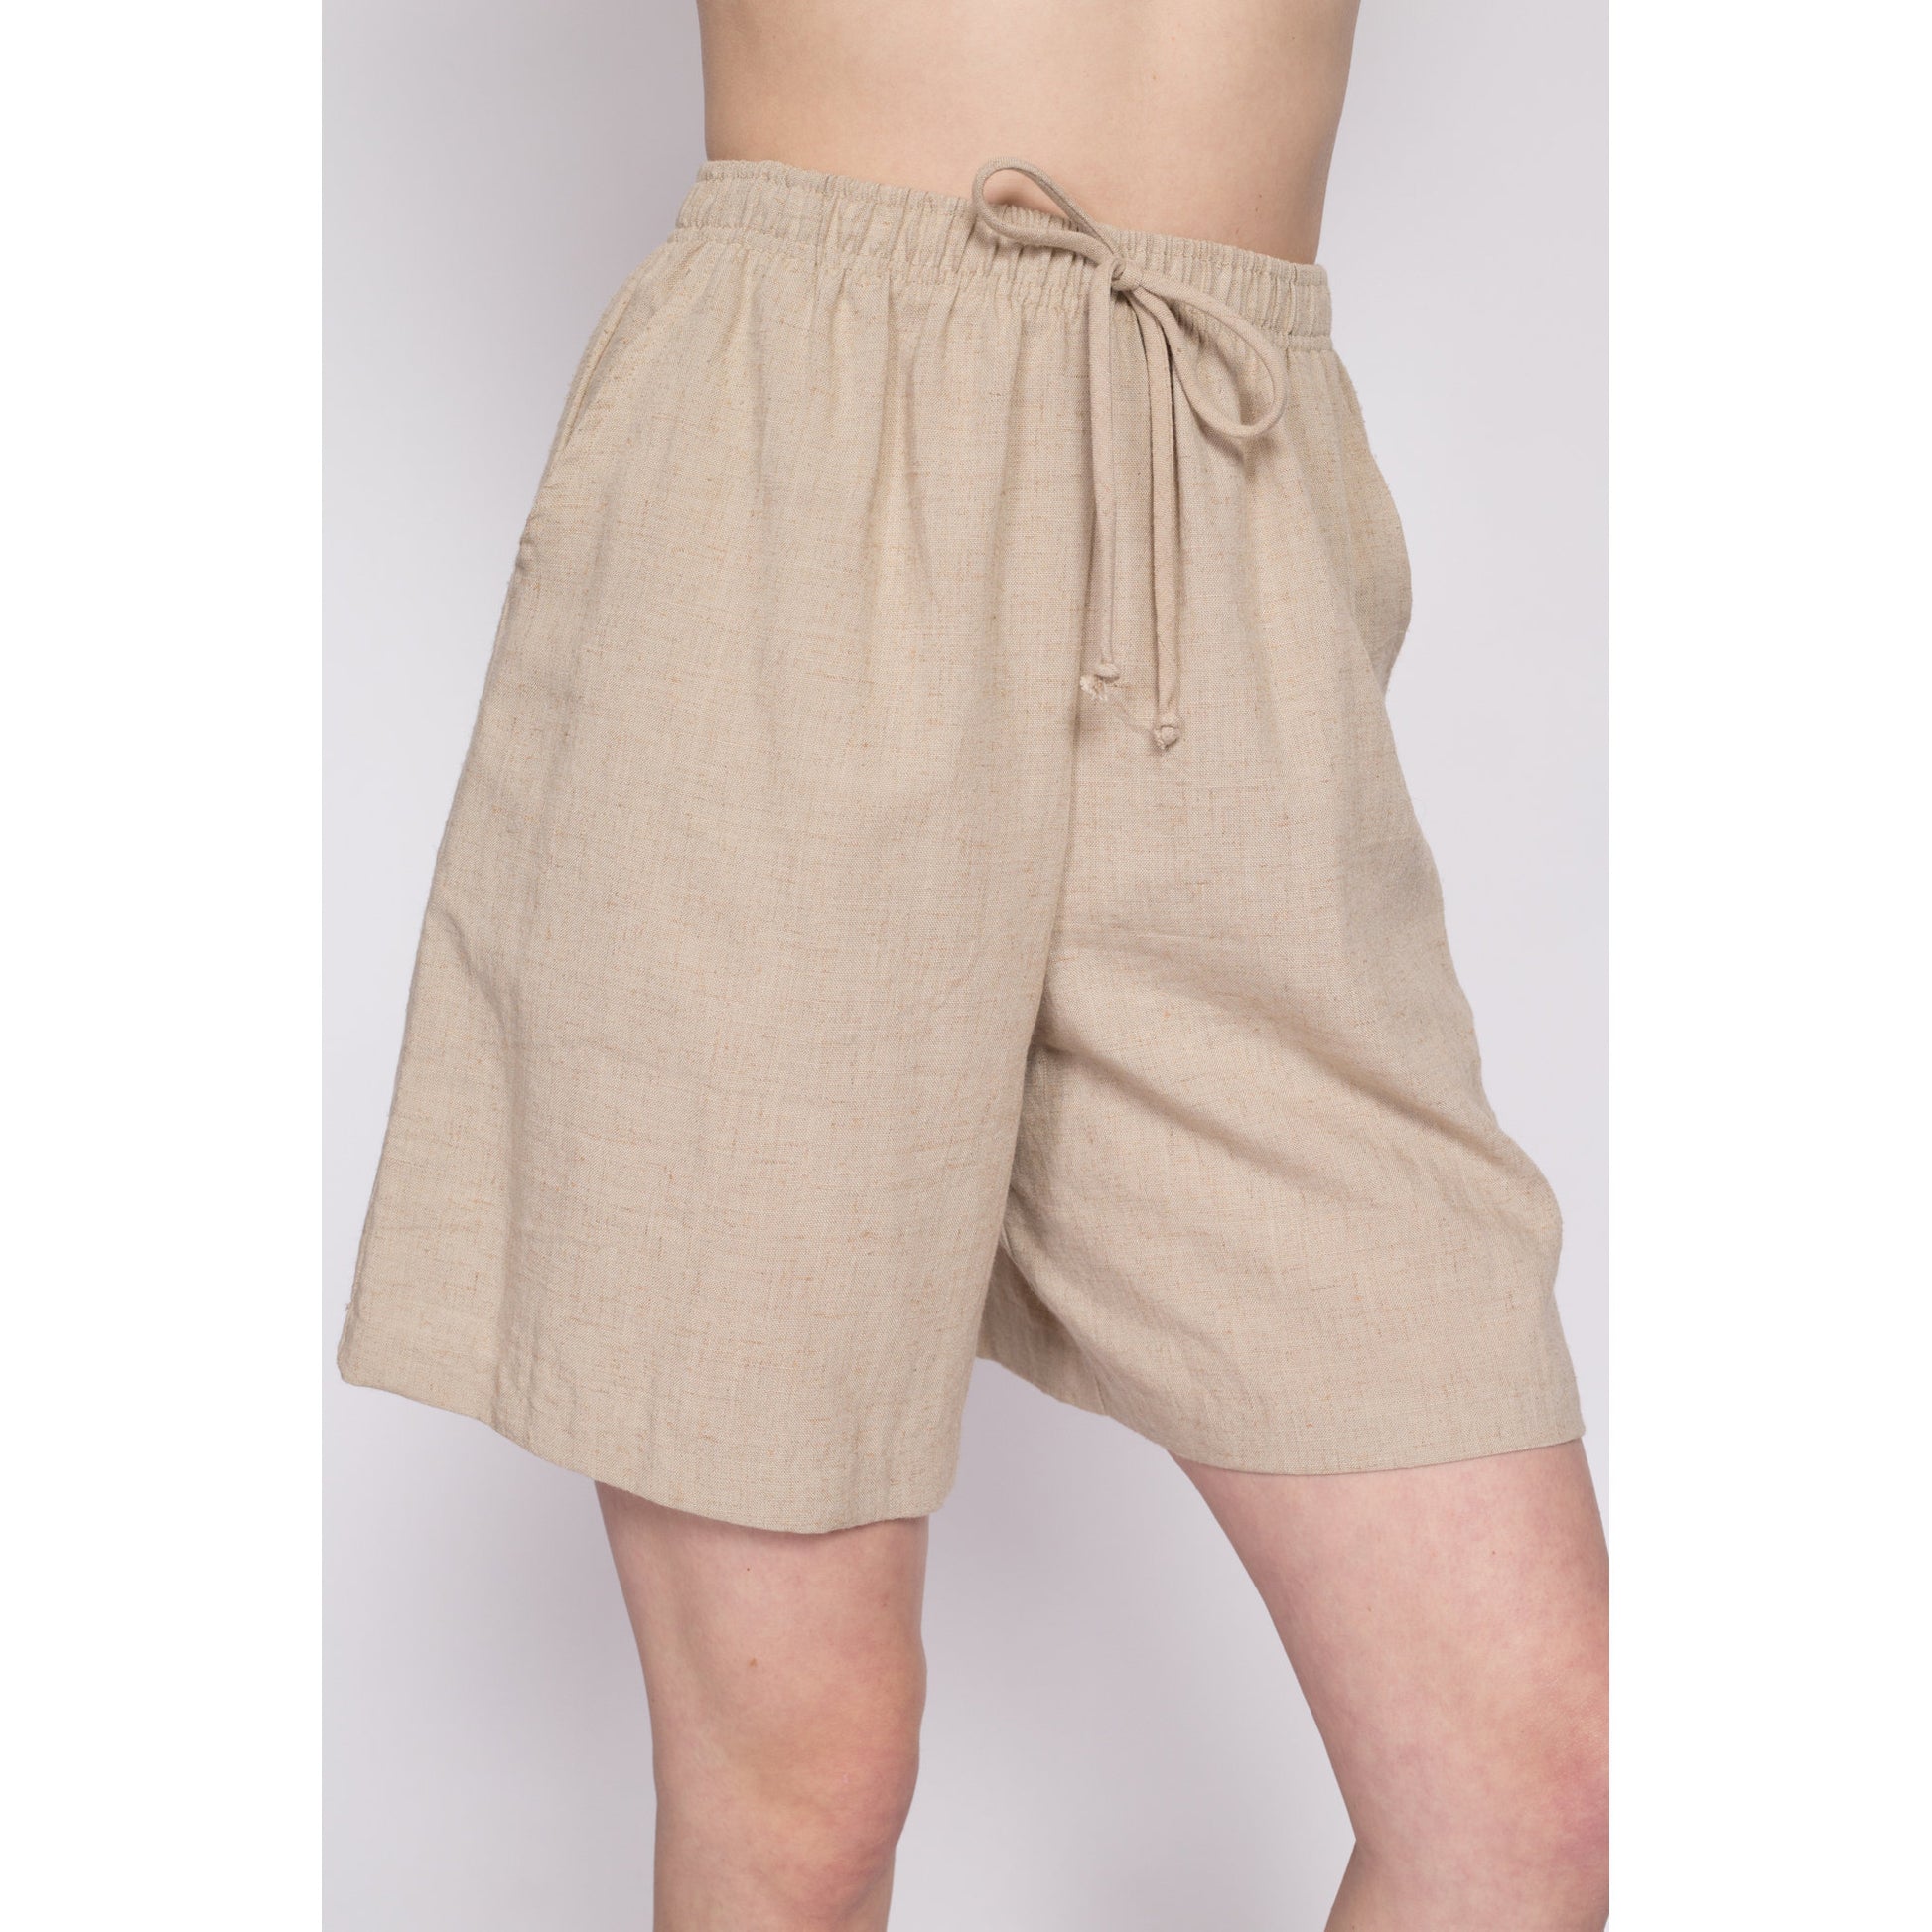 90s Oatmeal Linen Shorts - Small to Medium | Vintage Pleated Wide Leg Elastic Waist High Rise Casual Shorts